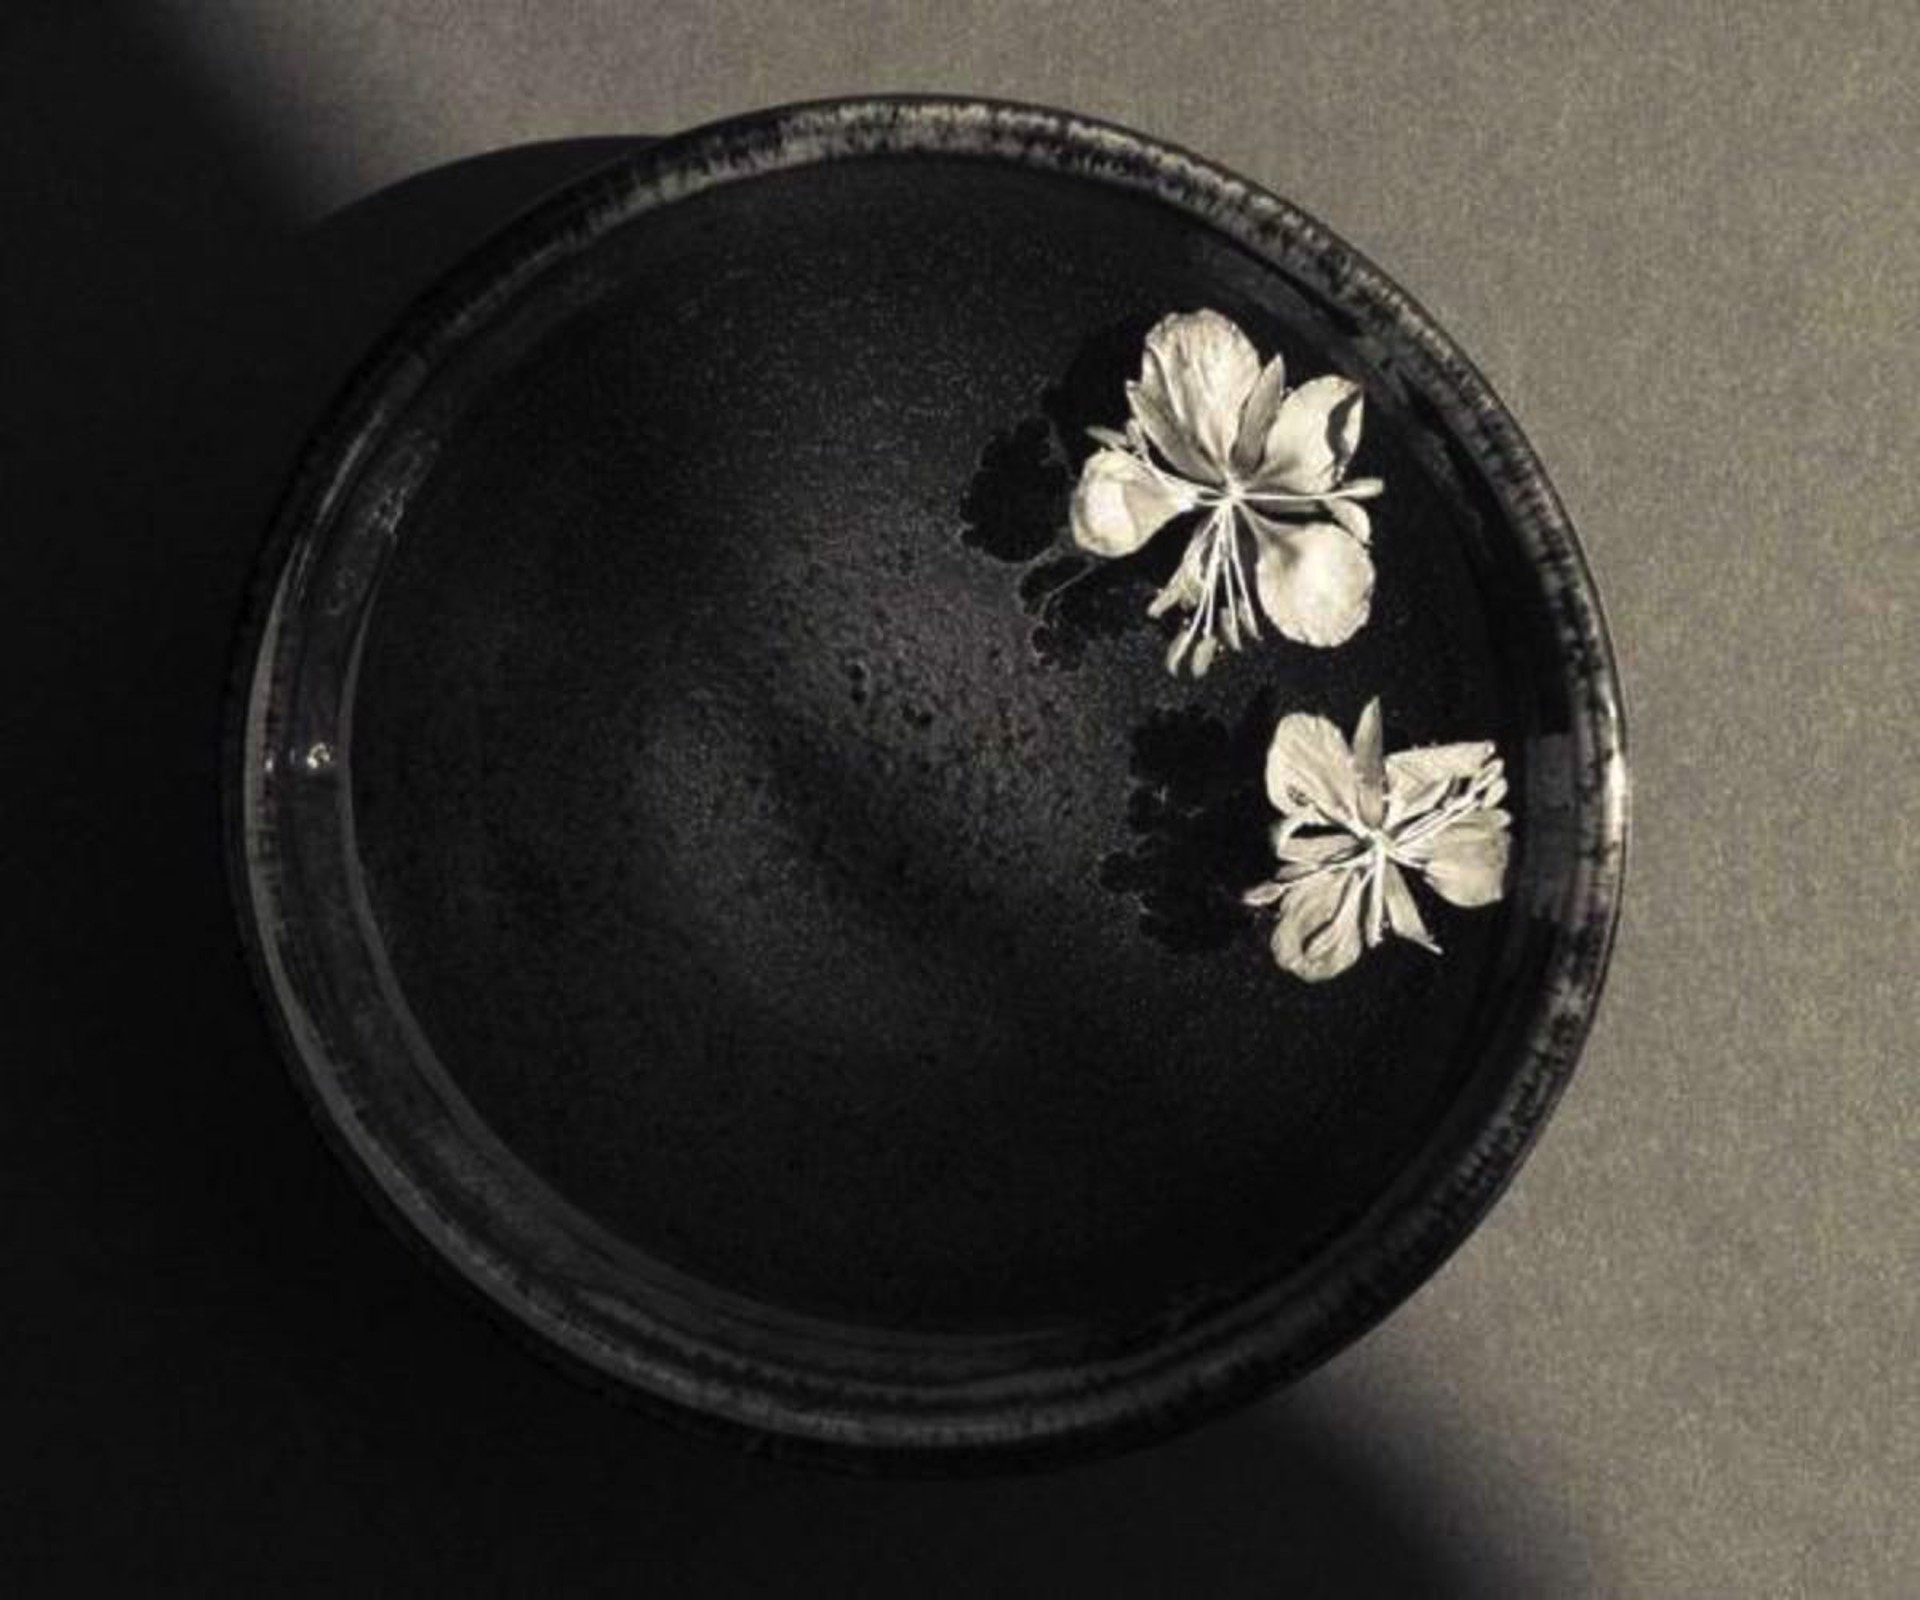 Petals and Japanese Bowl by Ken Smith